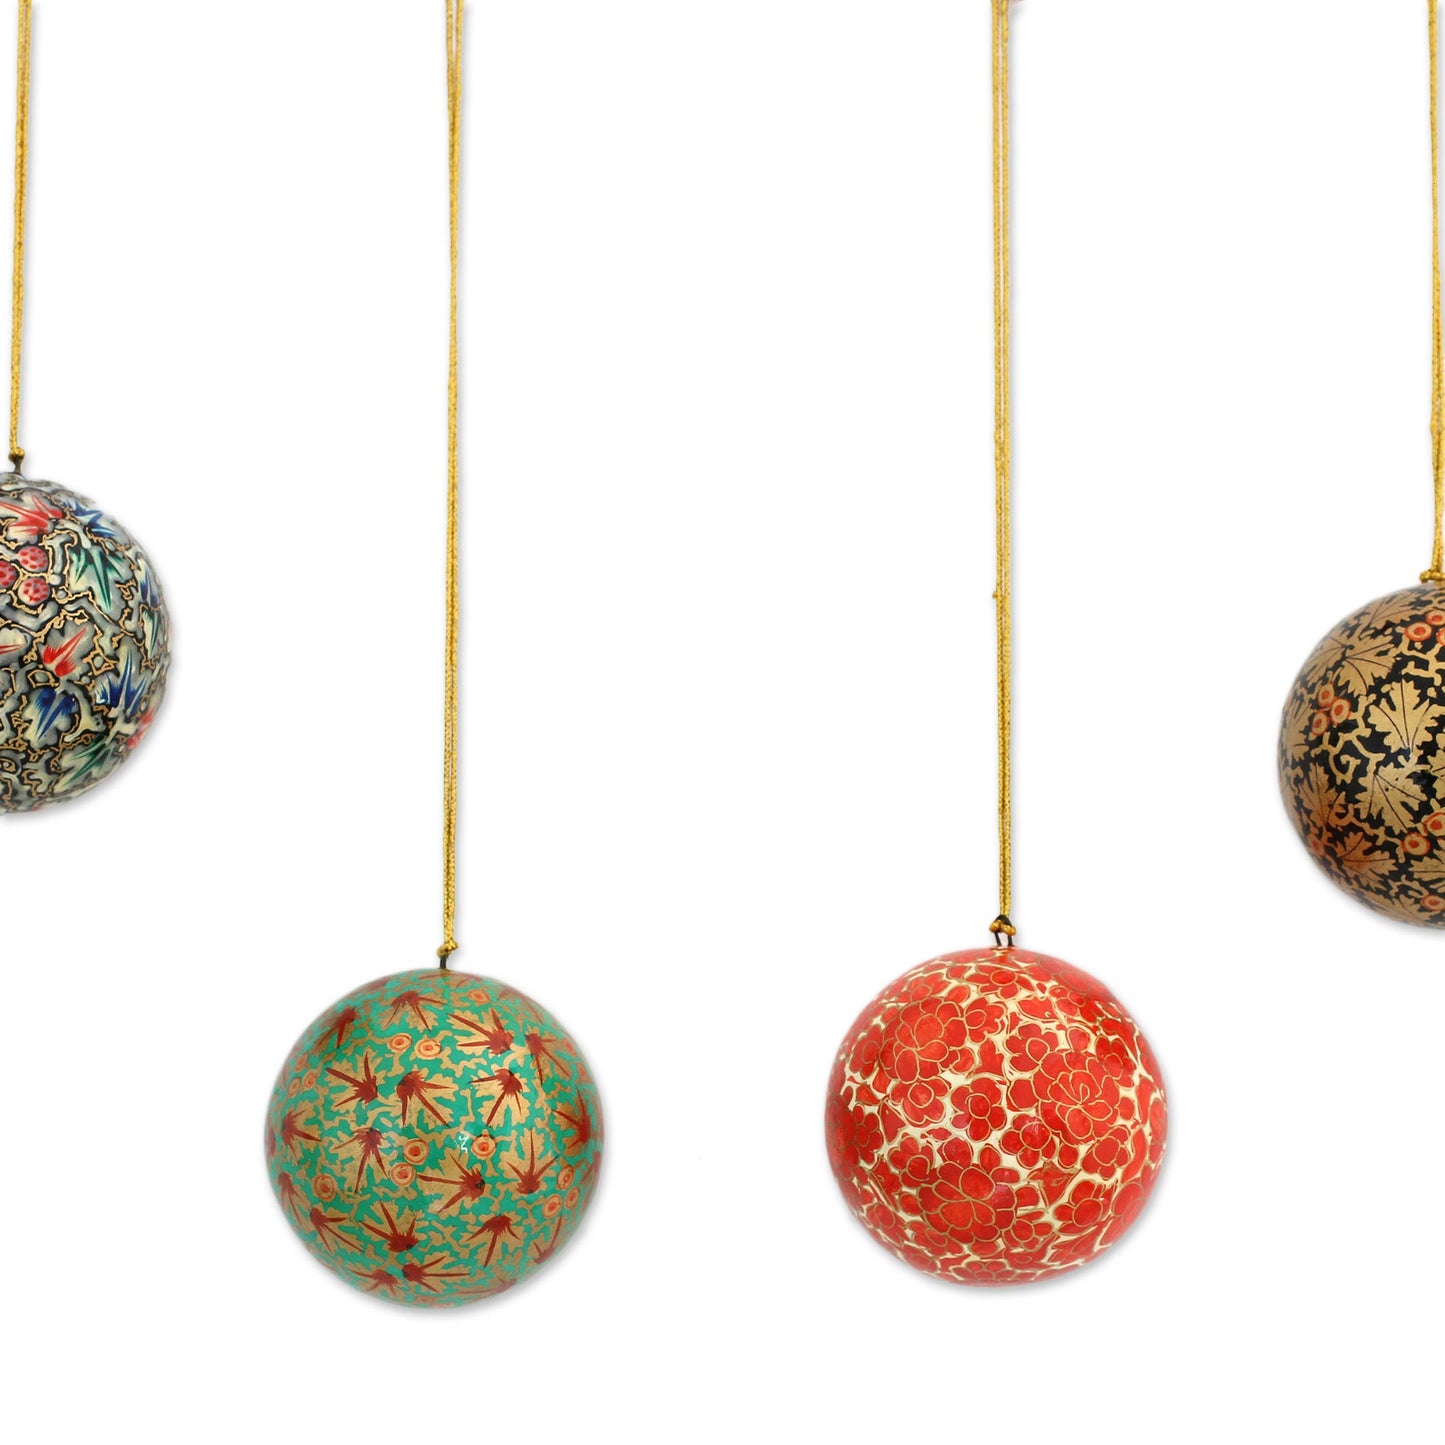 Alluring Baubles Set of Four Round Colorful Papier Mache Ornaments from India